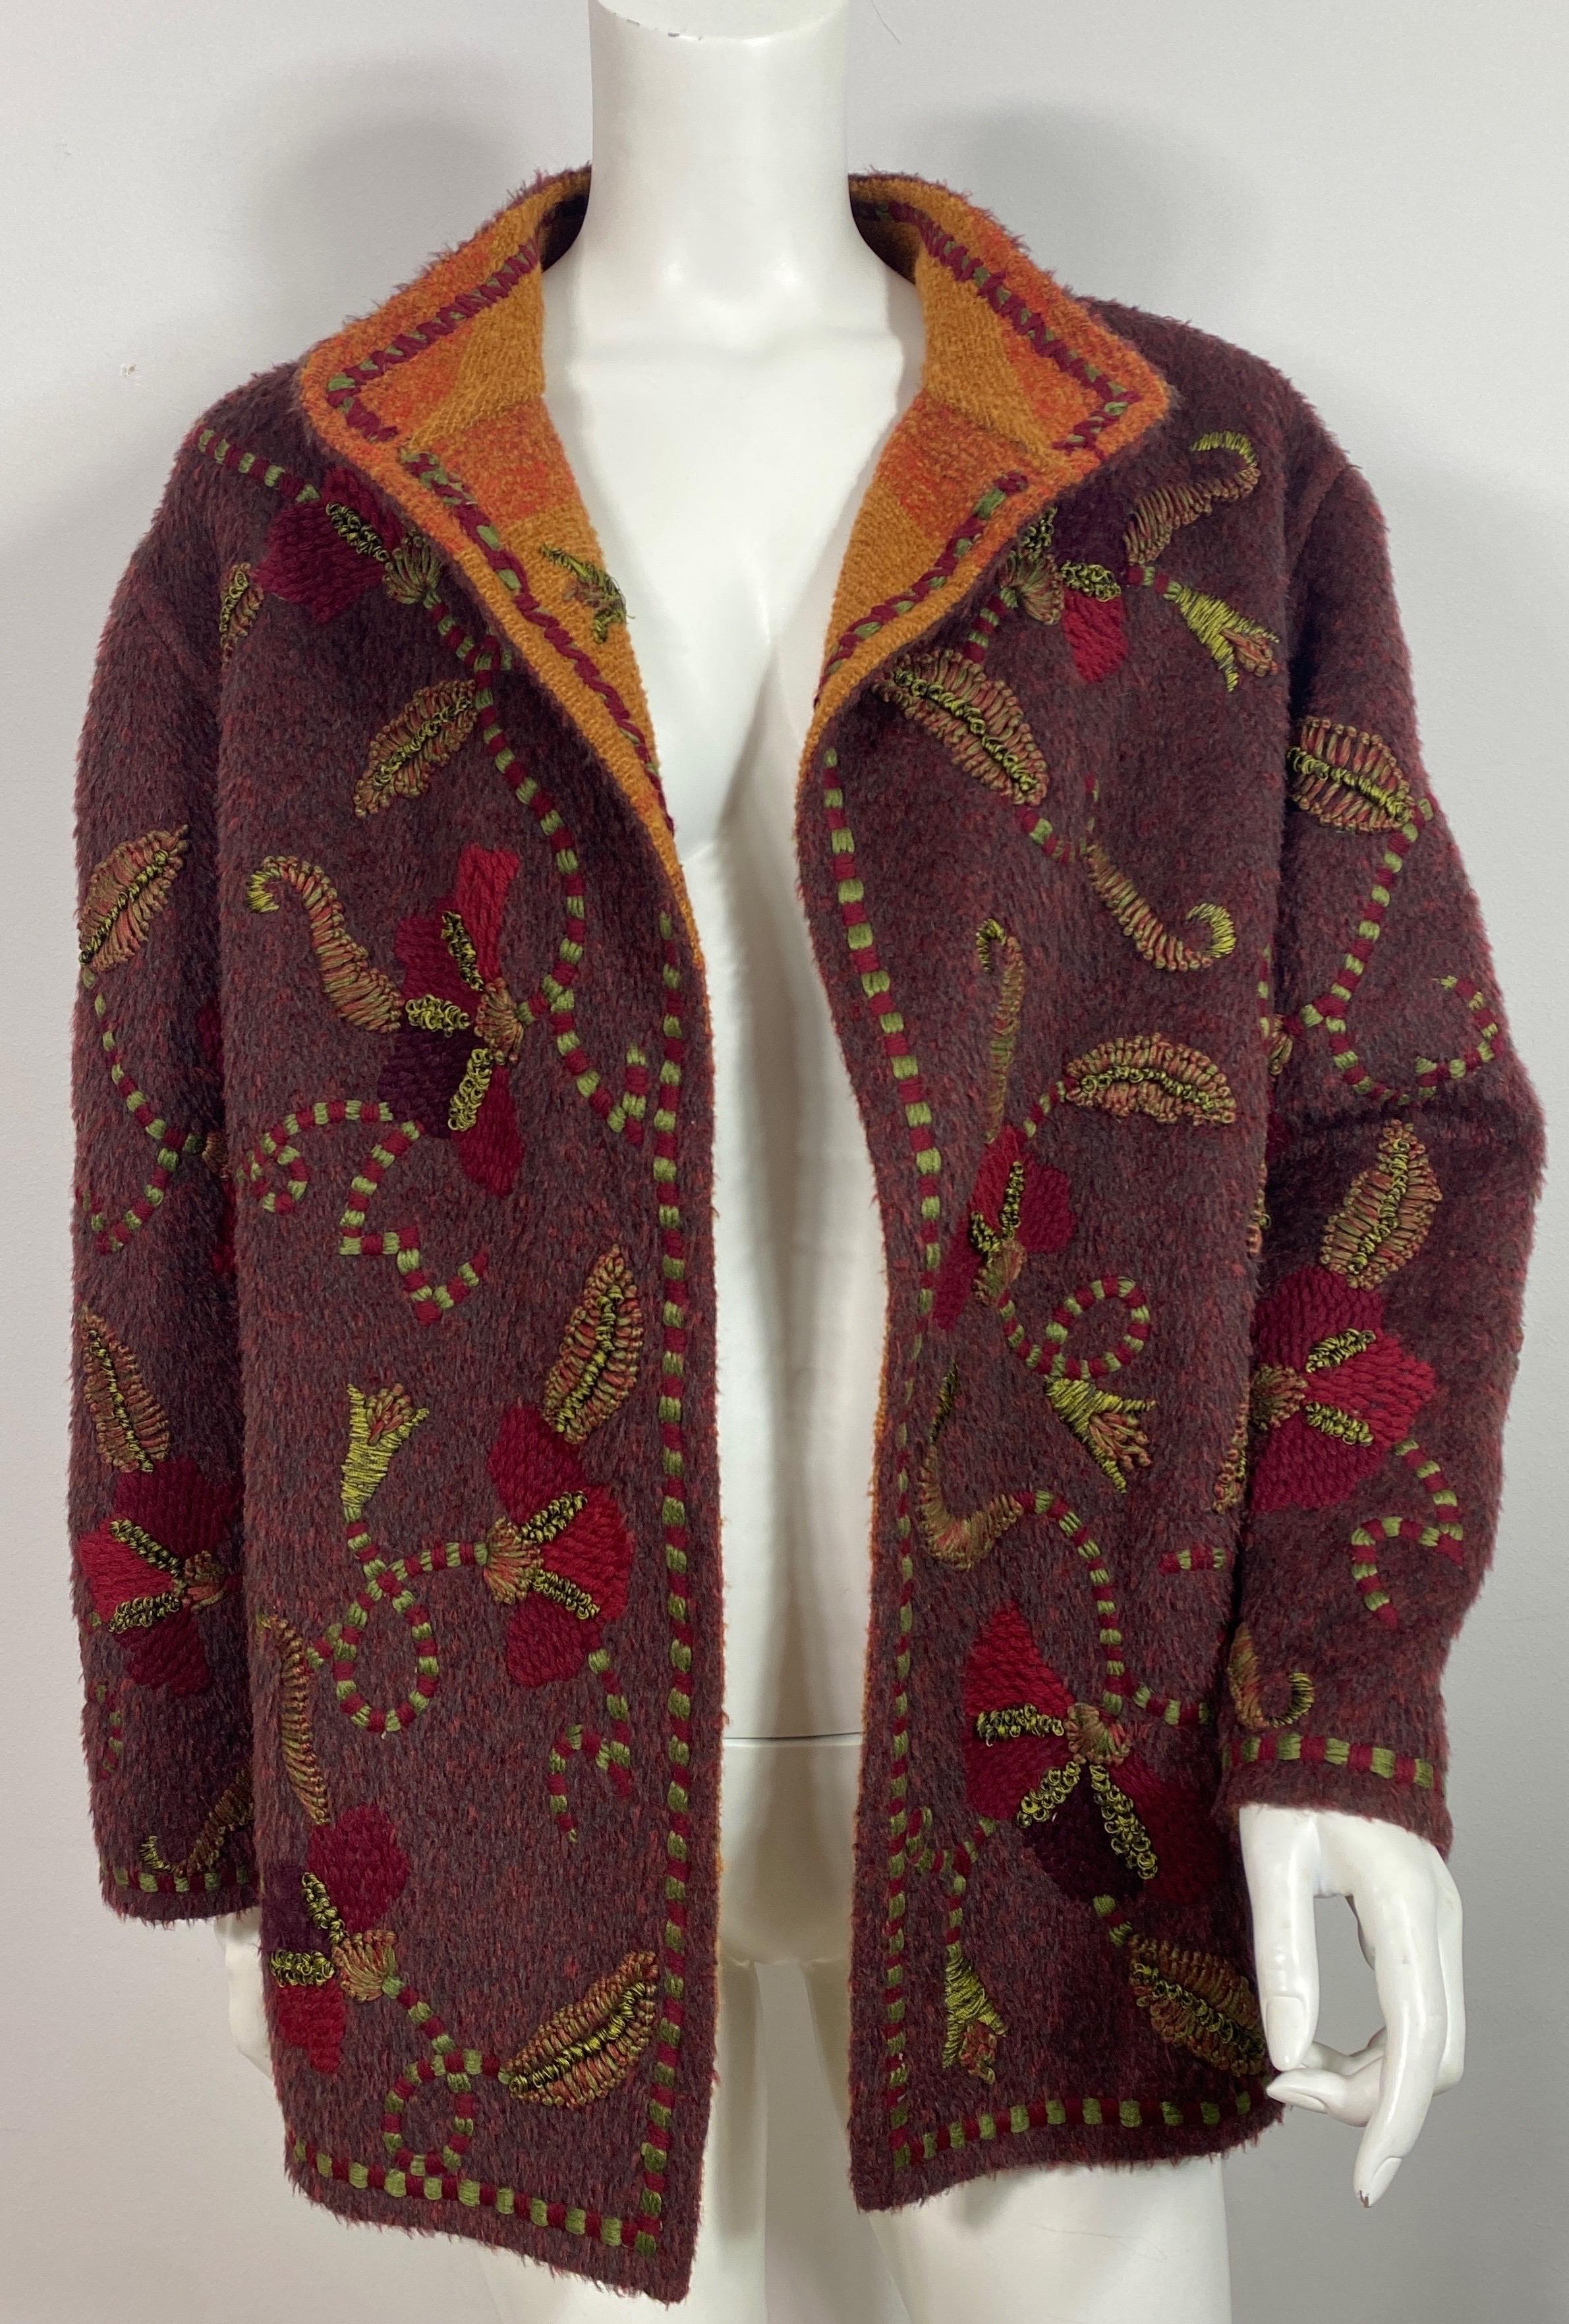 Oscar de La Renta Runway Fall 2000 Jewel tone Wool Embroidered Jacket-Size 6  Look 11 on the Runway of the Fall 2000 Fashion show. This spectacular Wool Blend (mohair and alpaca also) is a burgundy color with multi reds and olive green embroidery